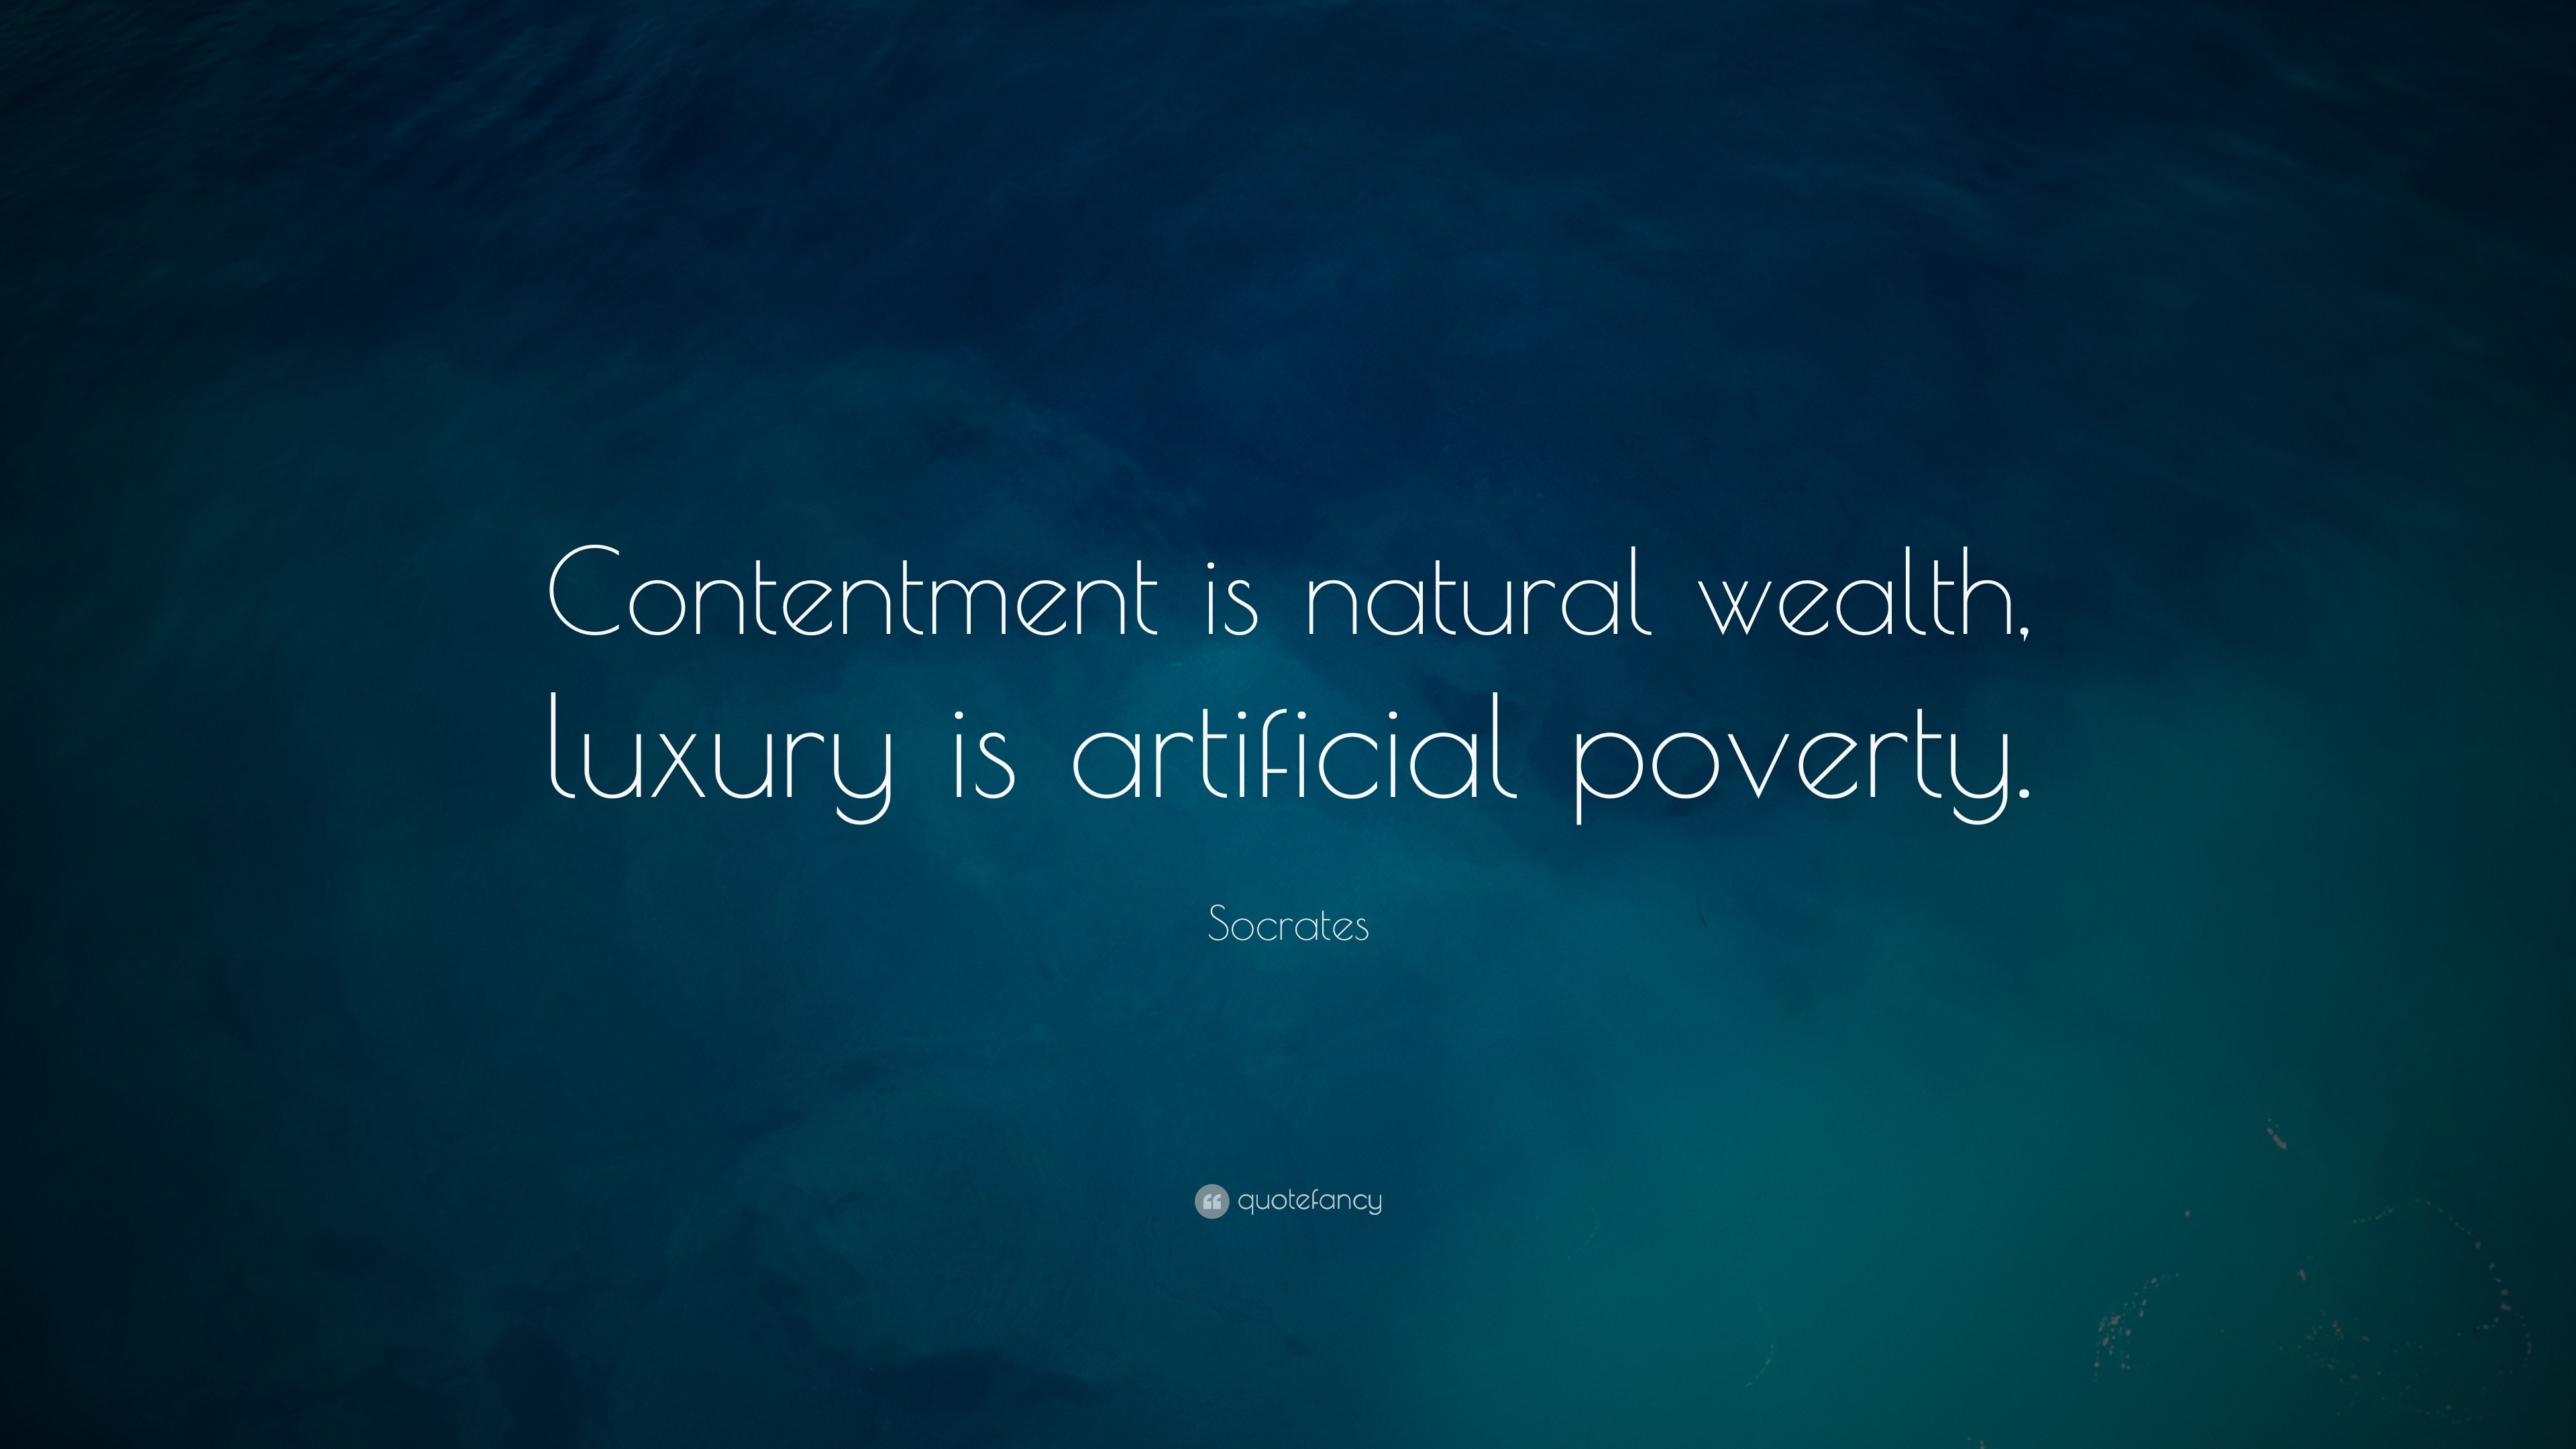 Socrates Quote “Contentment is natural wealth luxury is artificial poverty ”